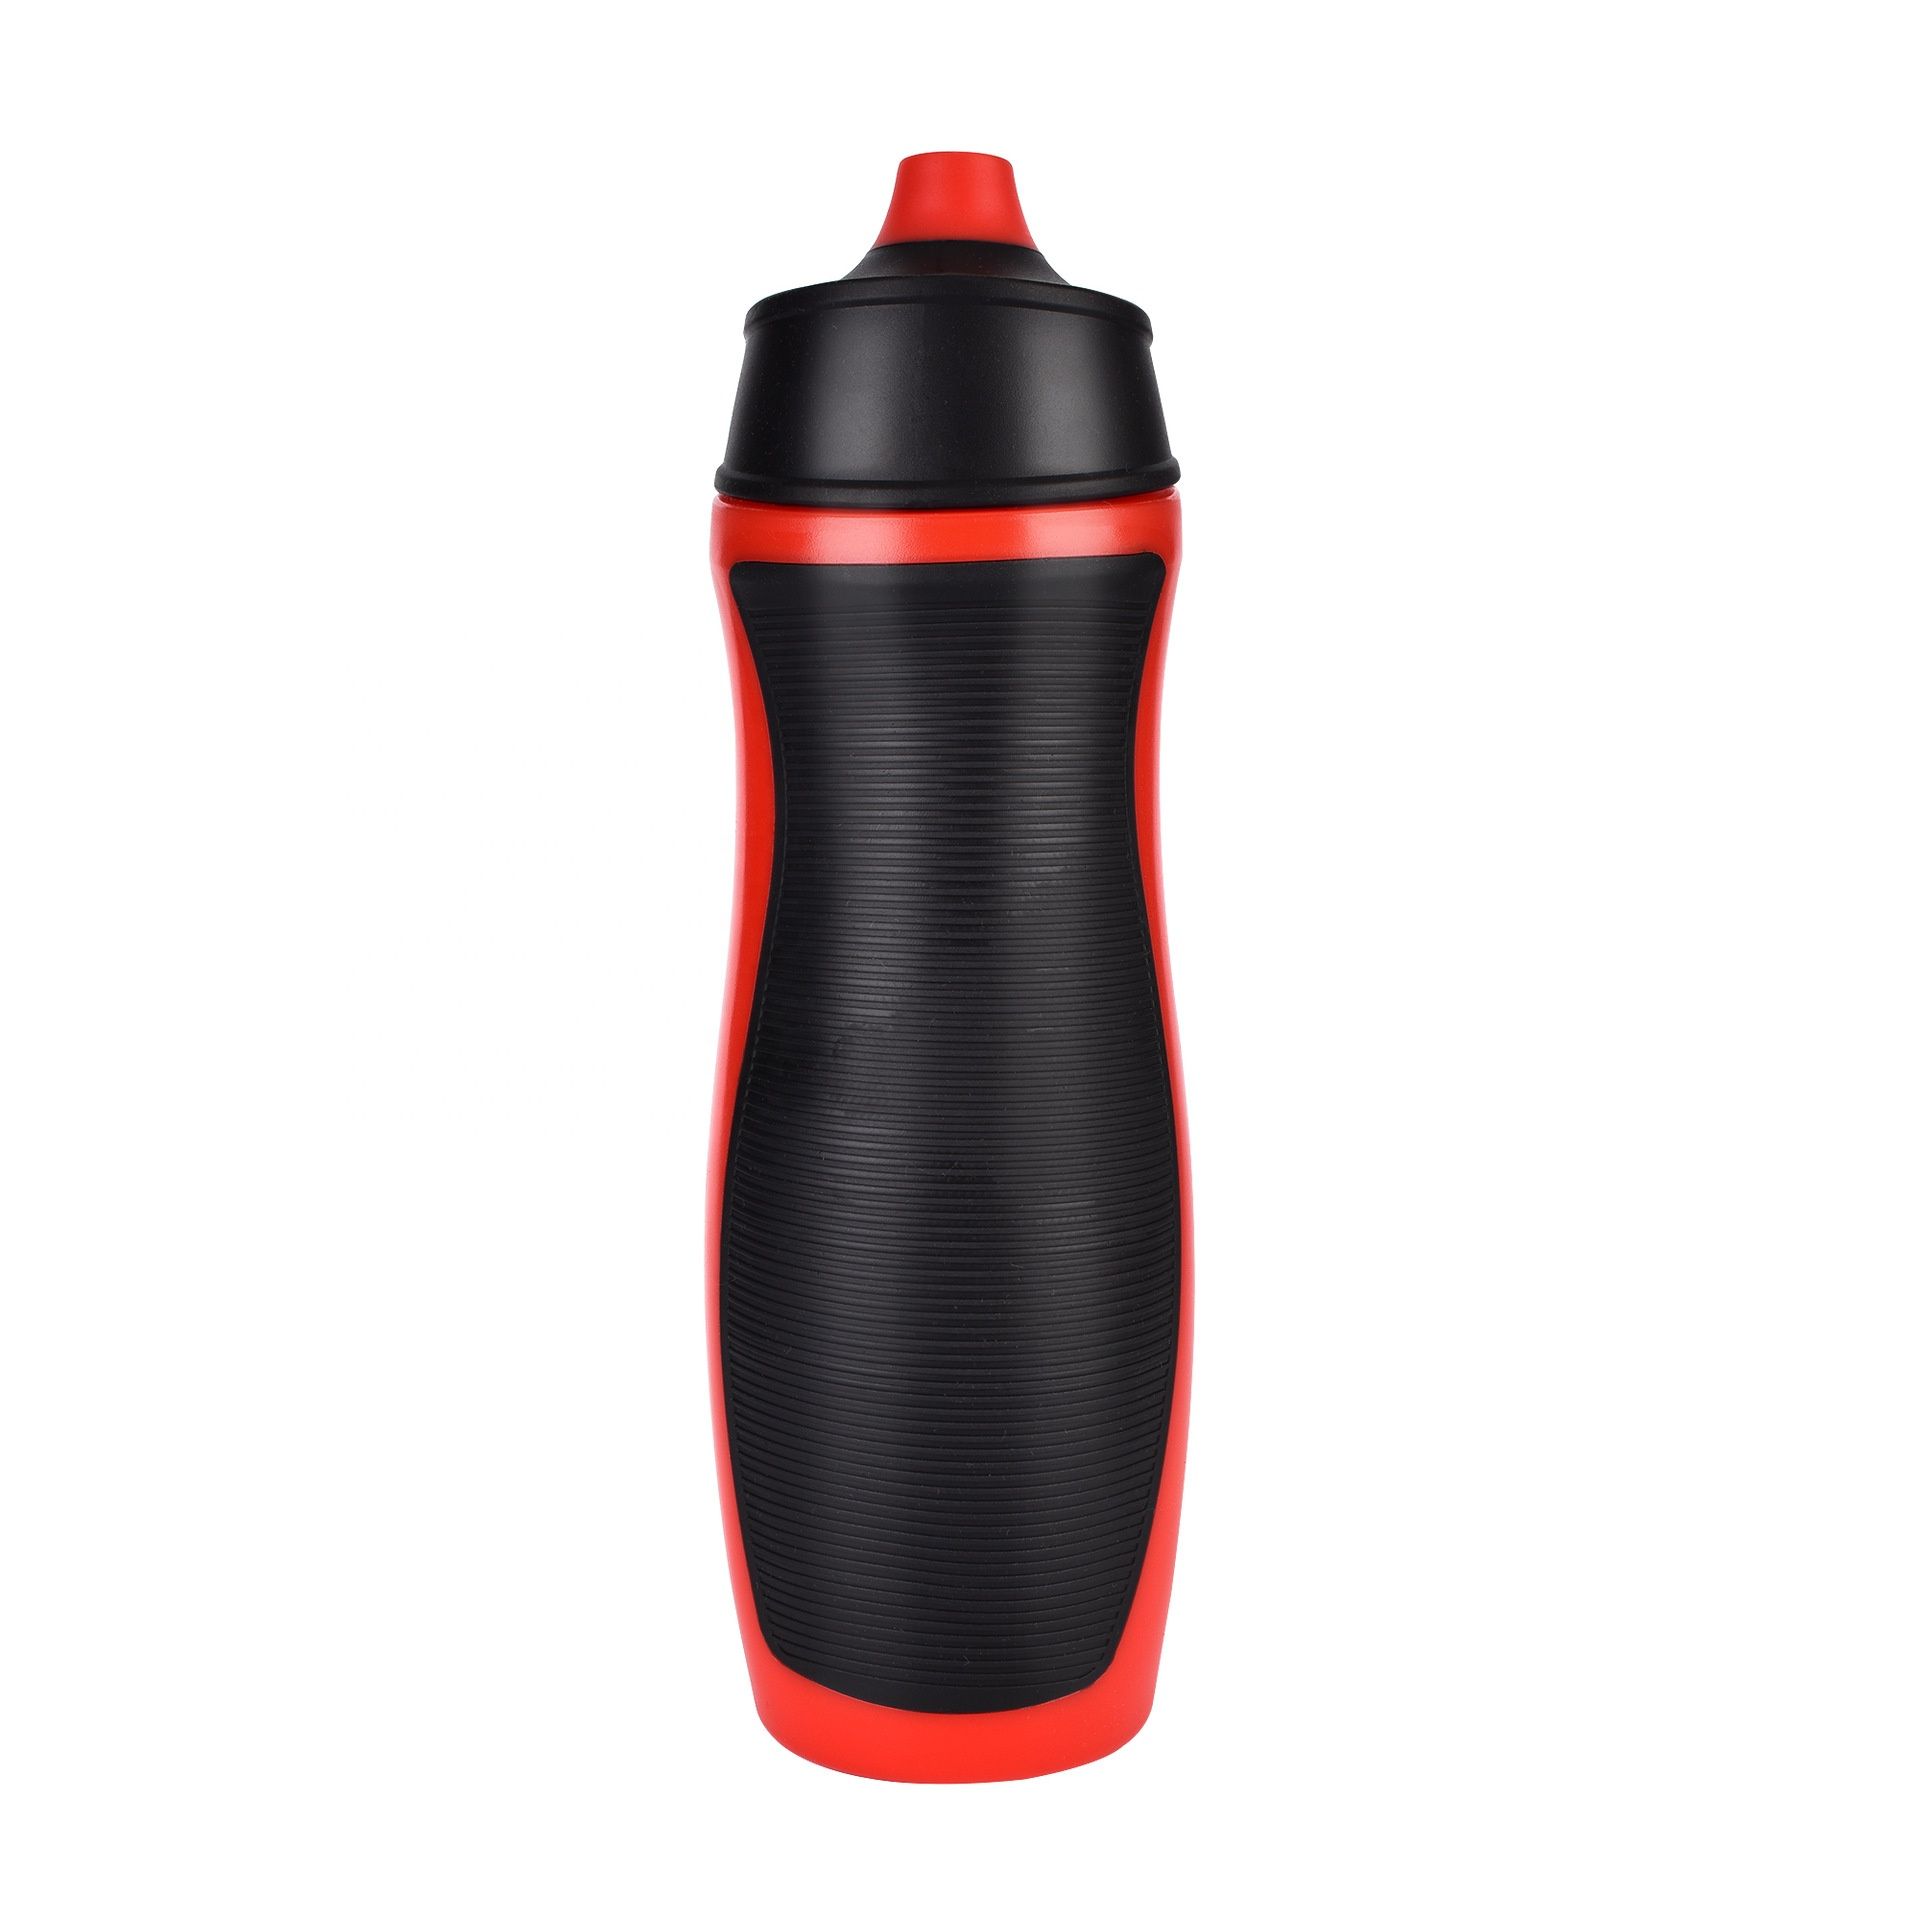 Best 500ml Plastic Squeeze Bicycle Water Bottle For Fitness Hiking Cycling Or Gym Workouts For Camping Hiking From Chankuku 1 8 Dhgate Com